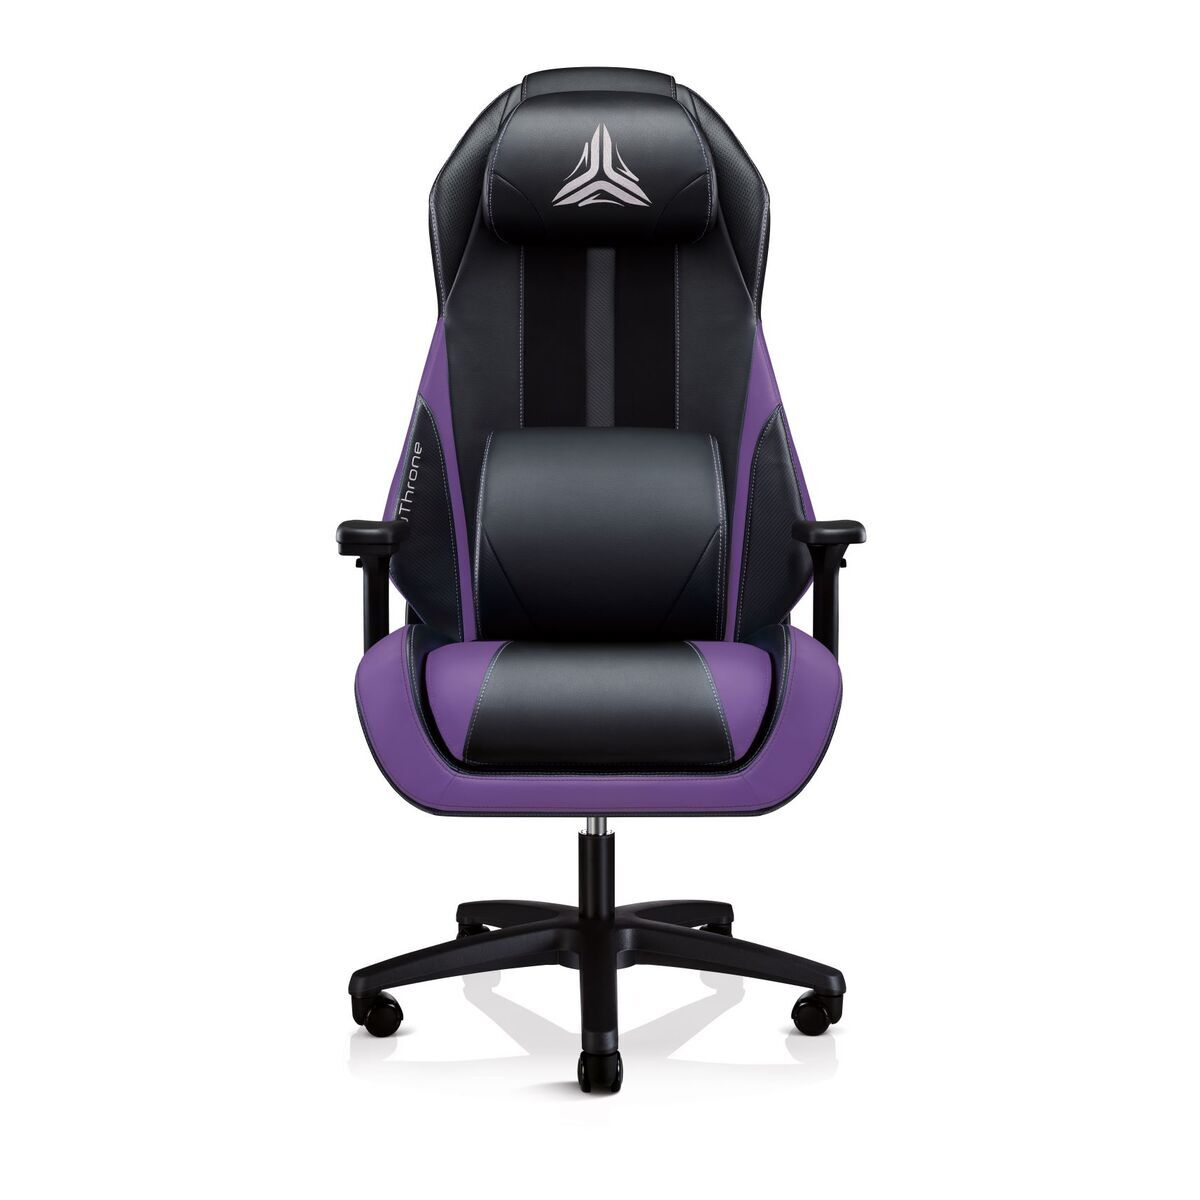 The OSIM office Massage Chair offers a luxuriously comfortable gaming experience.